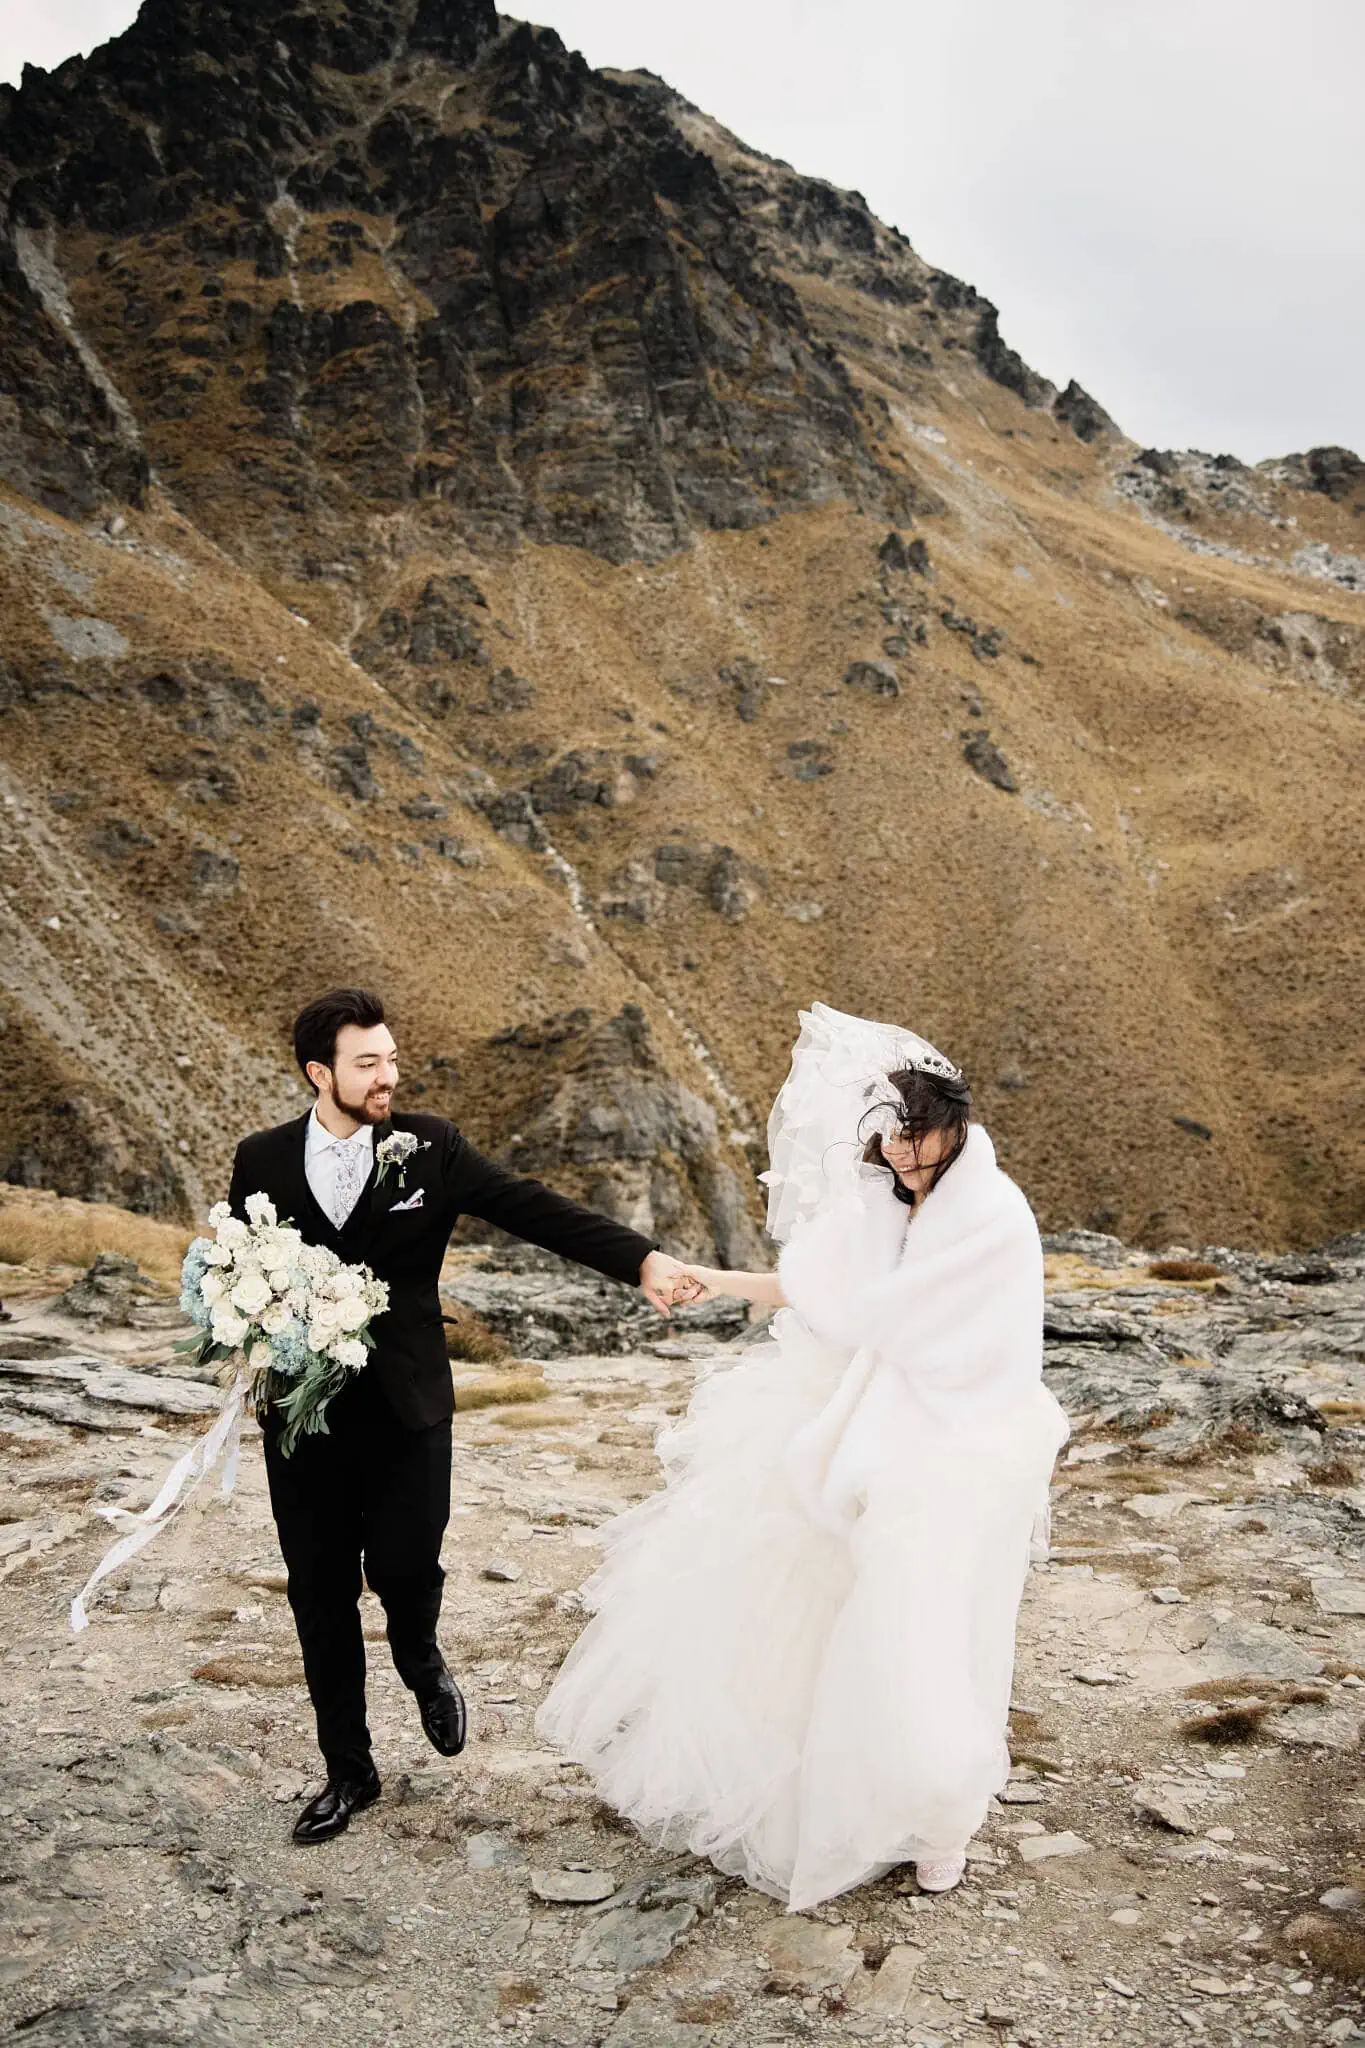 Carlos and Wanzhu's intimate elopement wedding in front of majestic mountains.